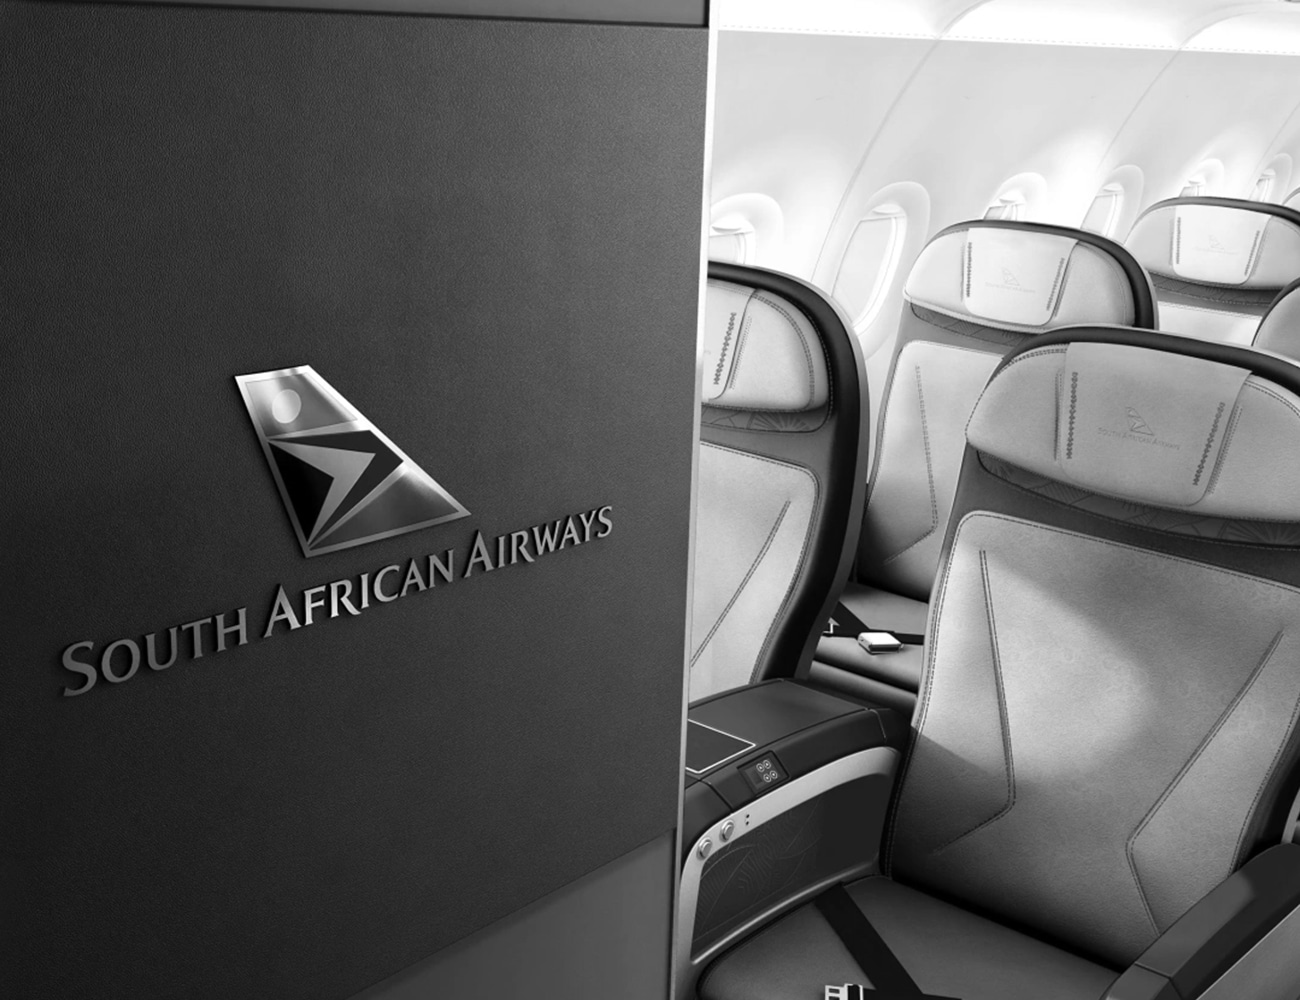 Seats Inside of South African Airlines